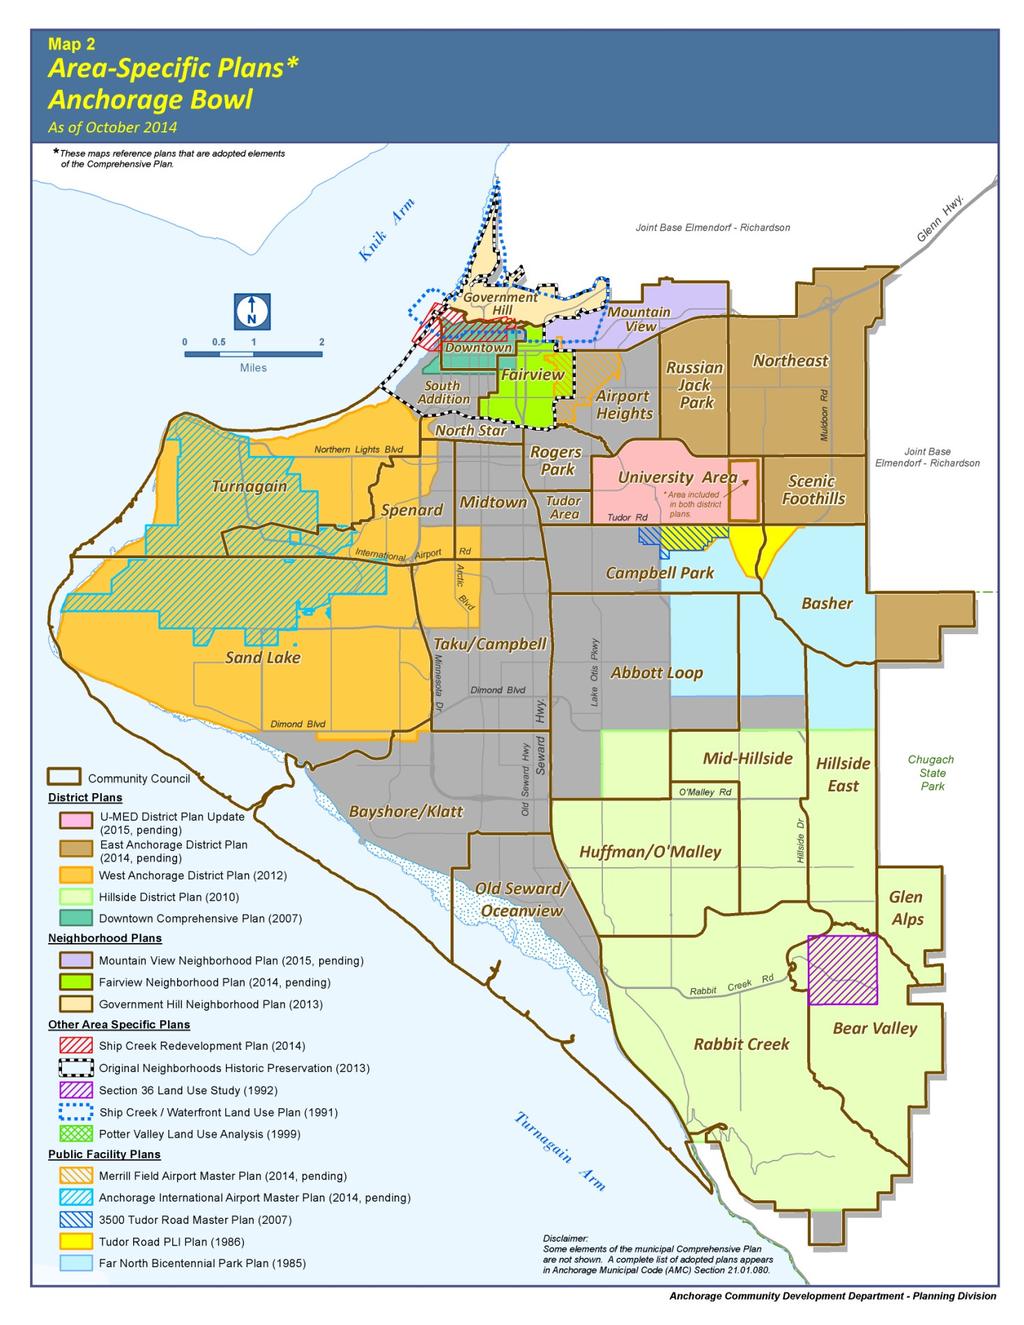 Area-specific Plans in Anchorage Bowl Since 2006: East Anchorage Plan West Anchorage Plan Hillside District Plan Downtown Plan Fairview